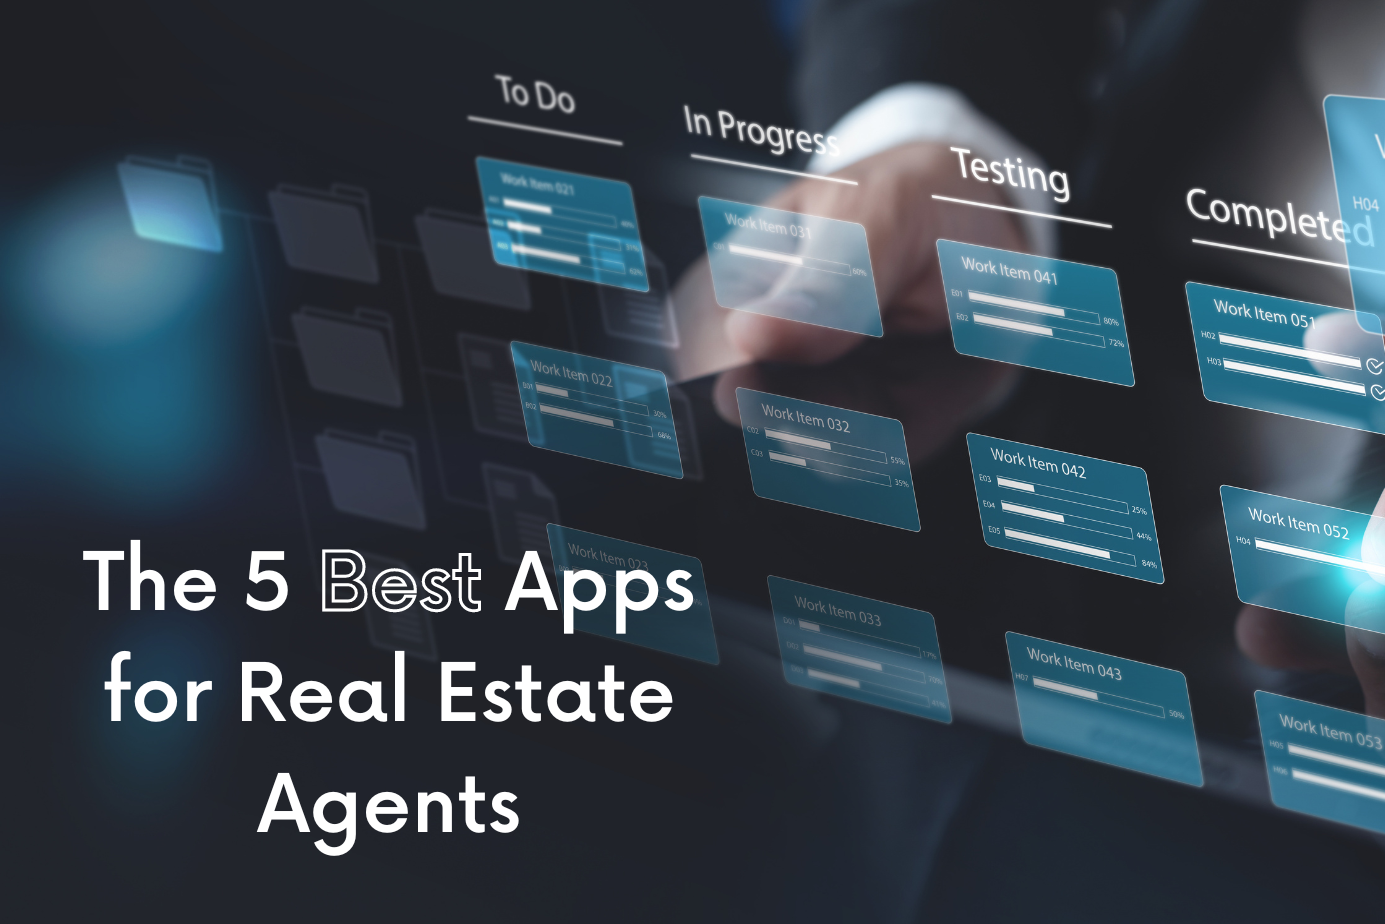 The 5 Best Apps for Real Estate Agents to Integrate Processes